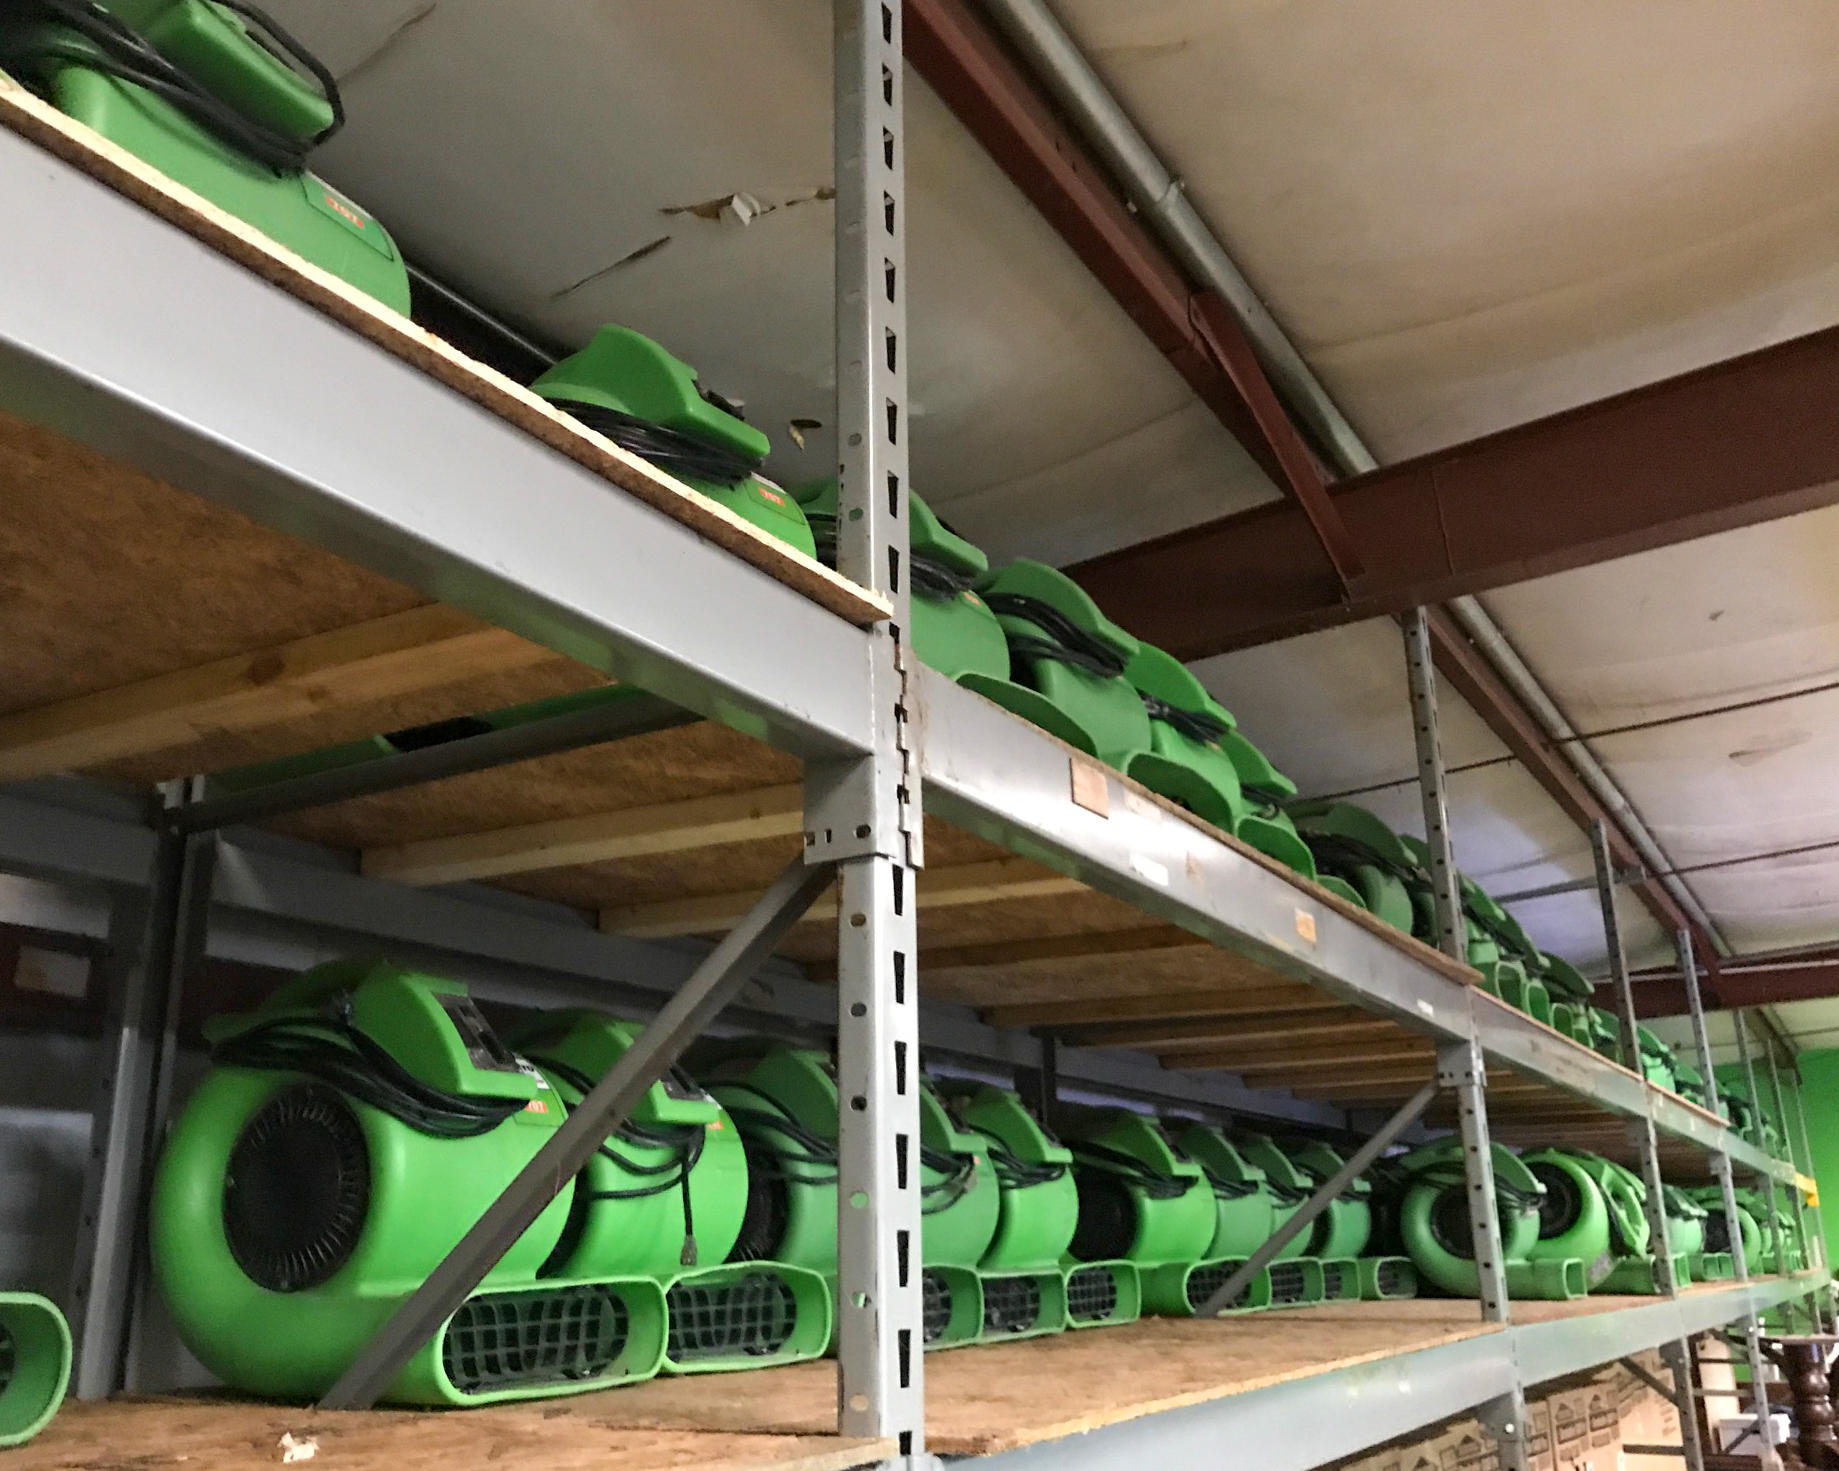 SERVPRO of Rutherford County is a cleaning and restoration company with a focus on water damage, fire damage, mold remediation, and general cleaning in a residential as well as commercial capacity.